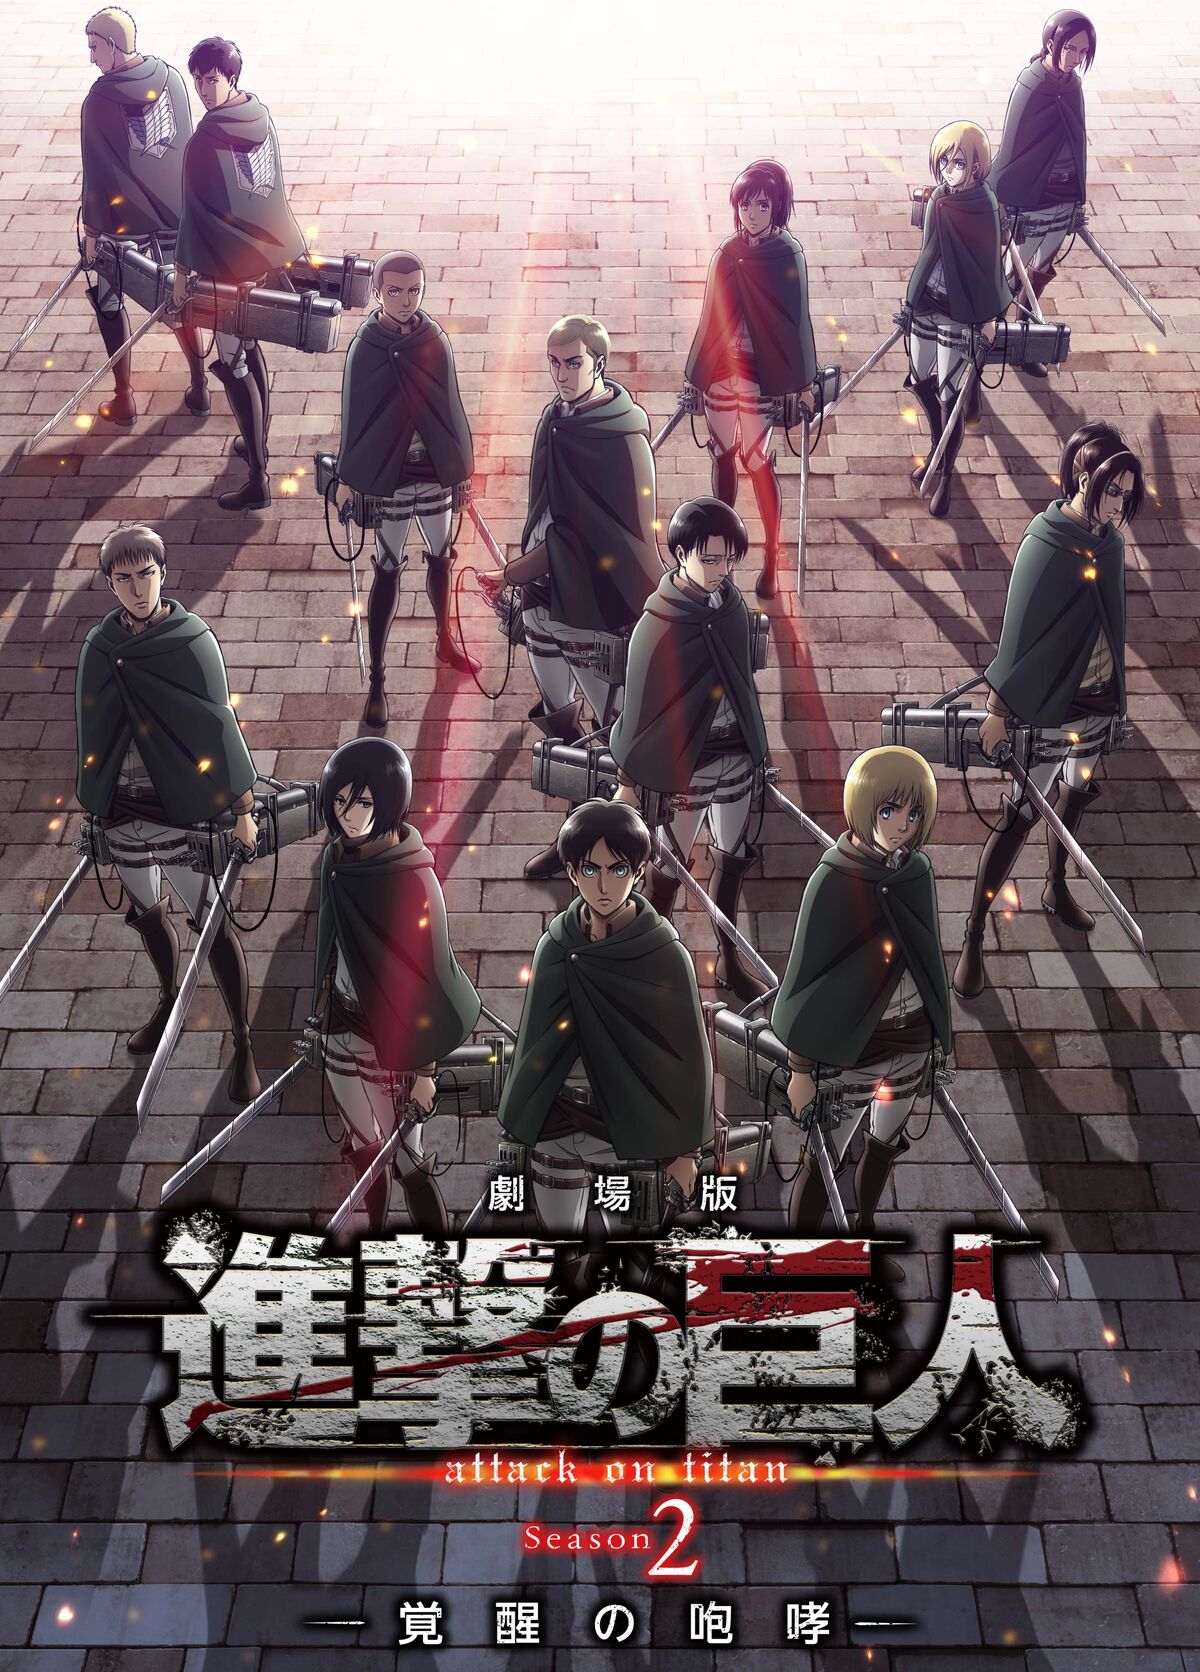 Attack on Titan 2: A Sudden Rain official promotional image